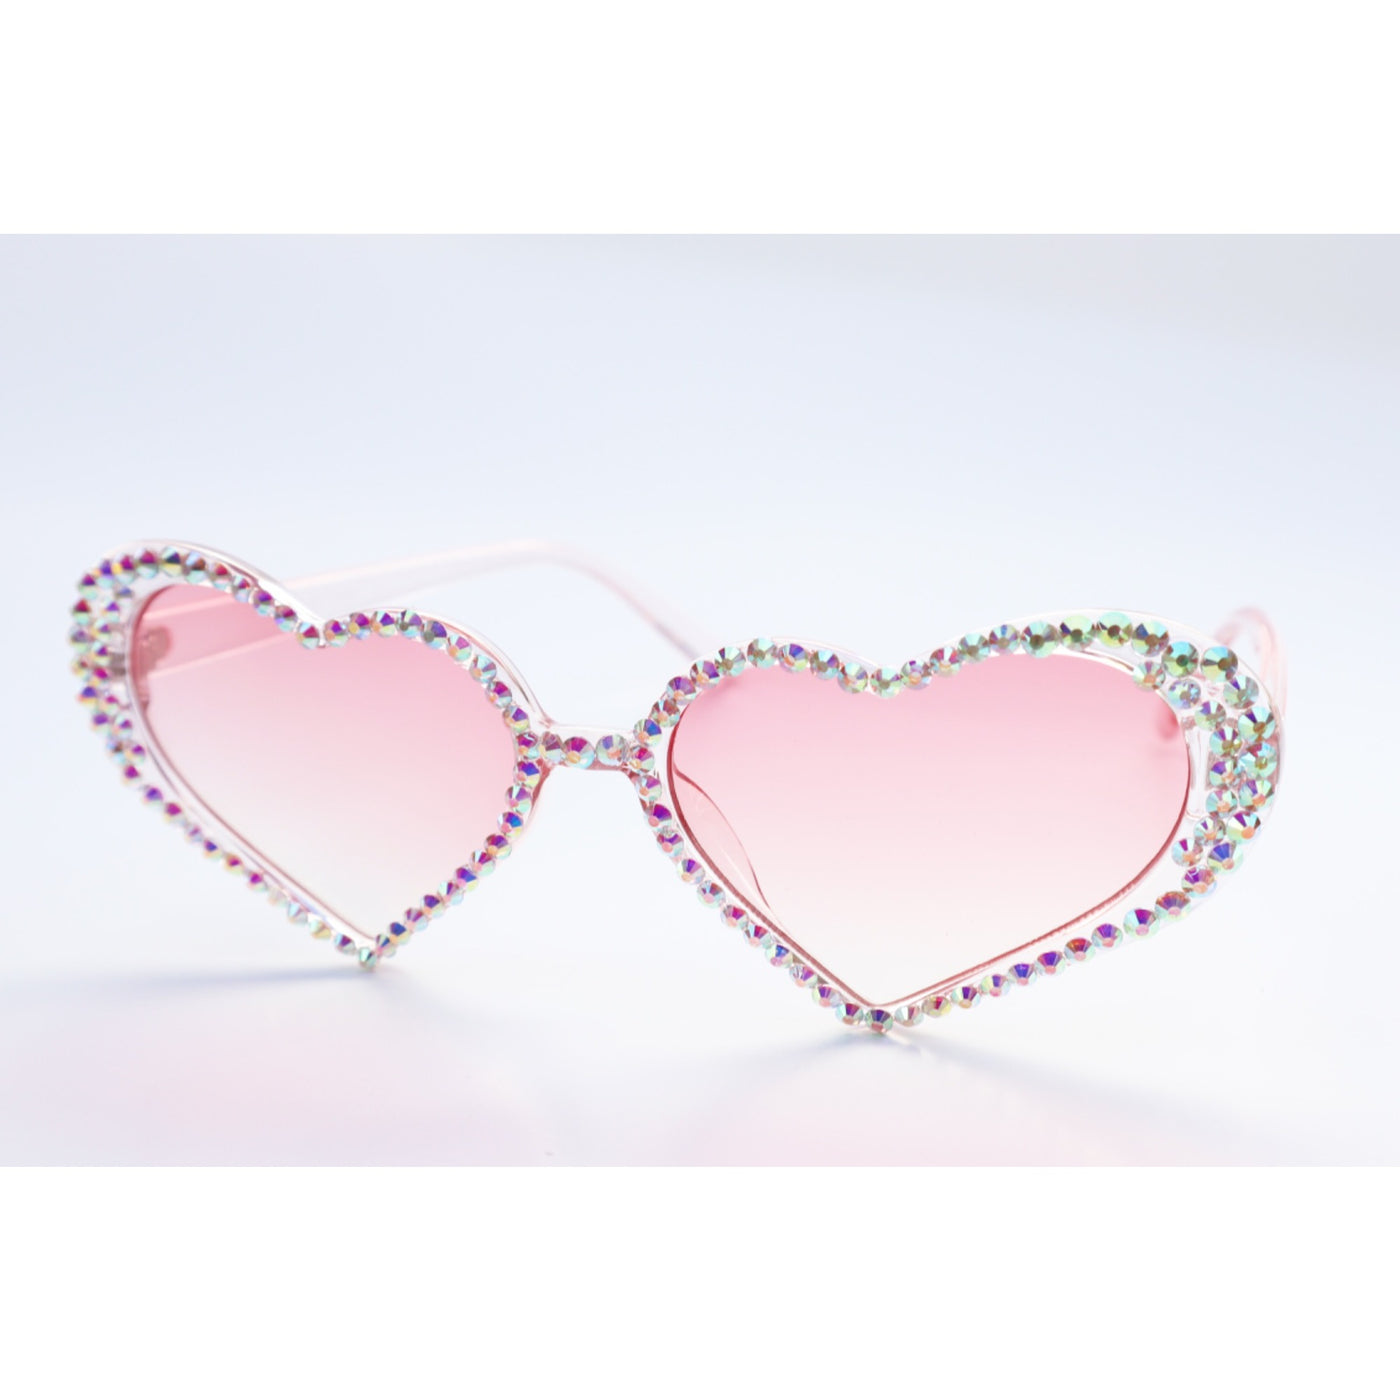 True Love Heart Sunglasses Encrusted with Multi-Color Rhinestones on Pink Lens